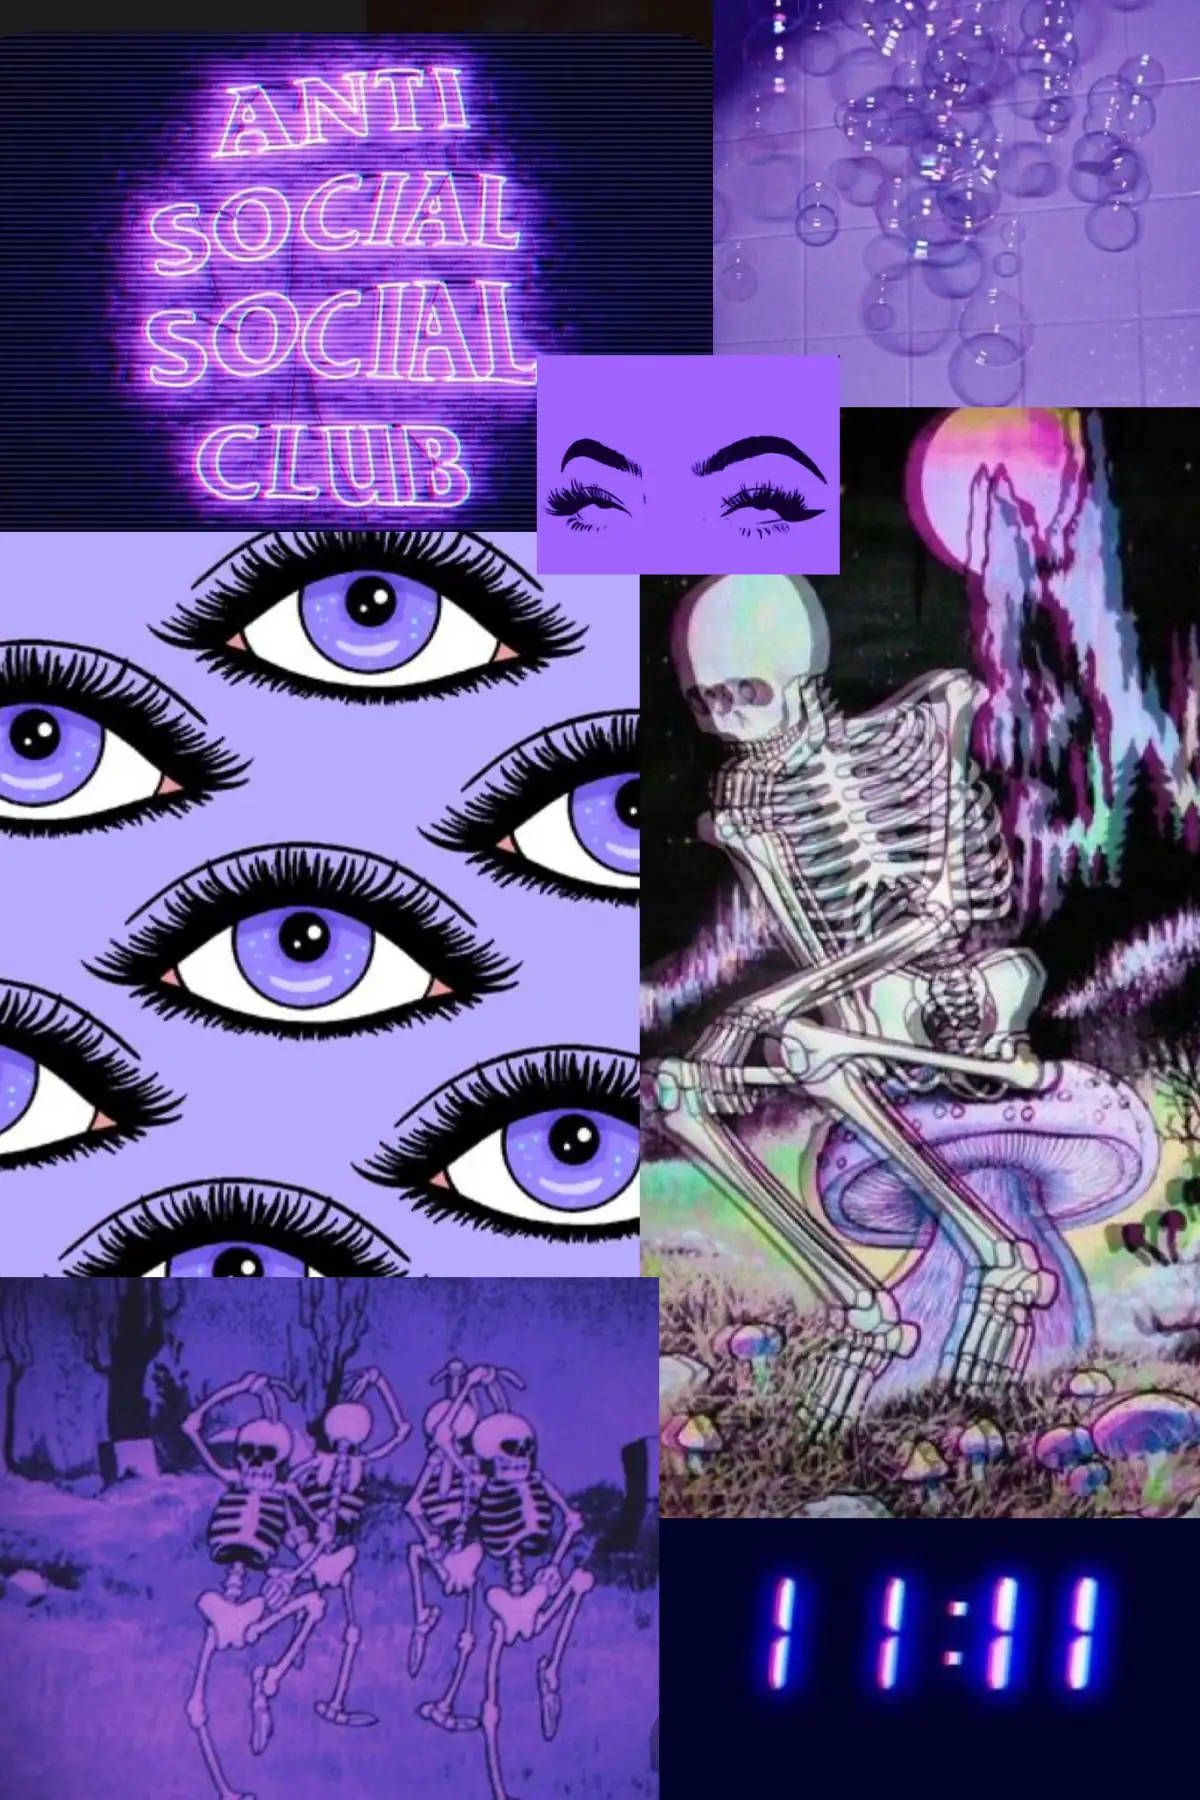 Aesthetic background of purple and black, with a collage of eyes, skeletons, and the words 